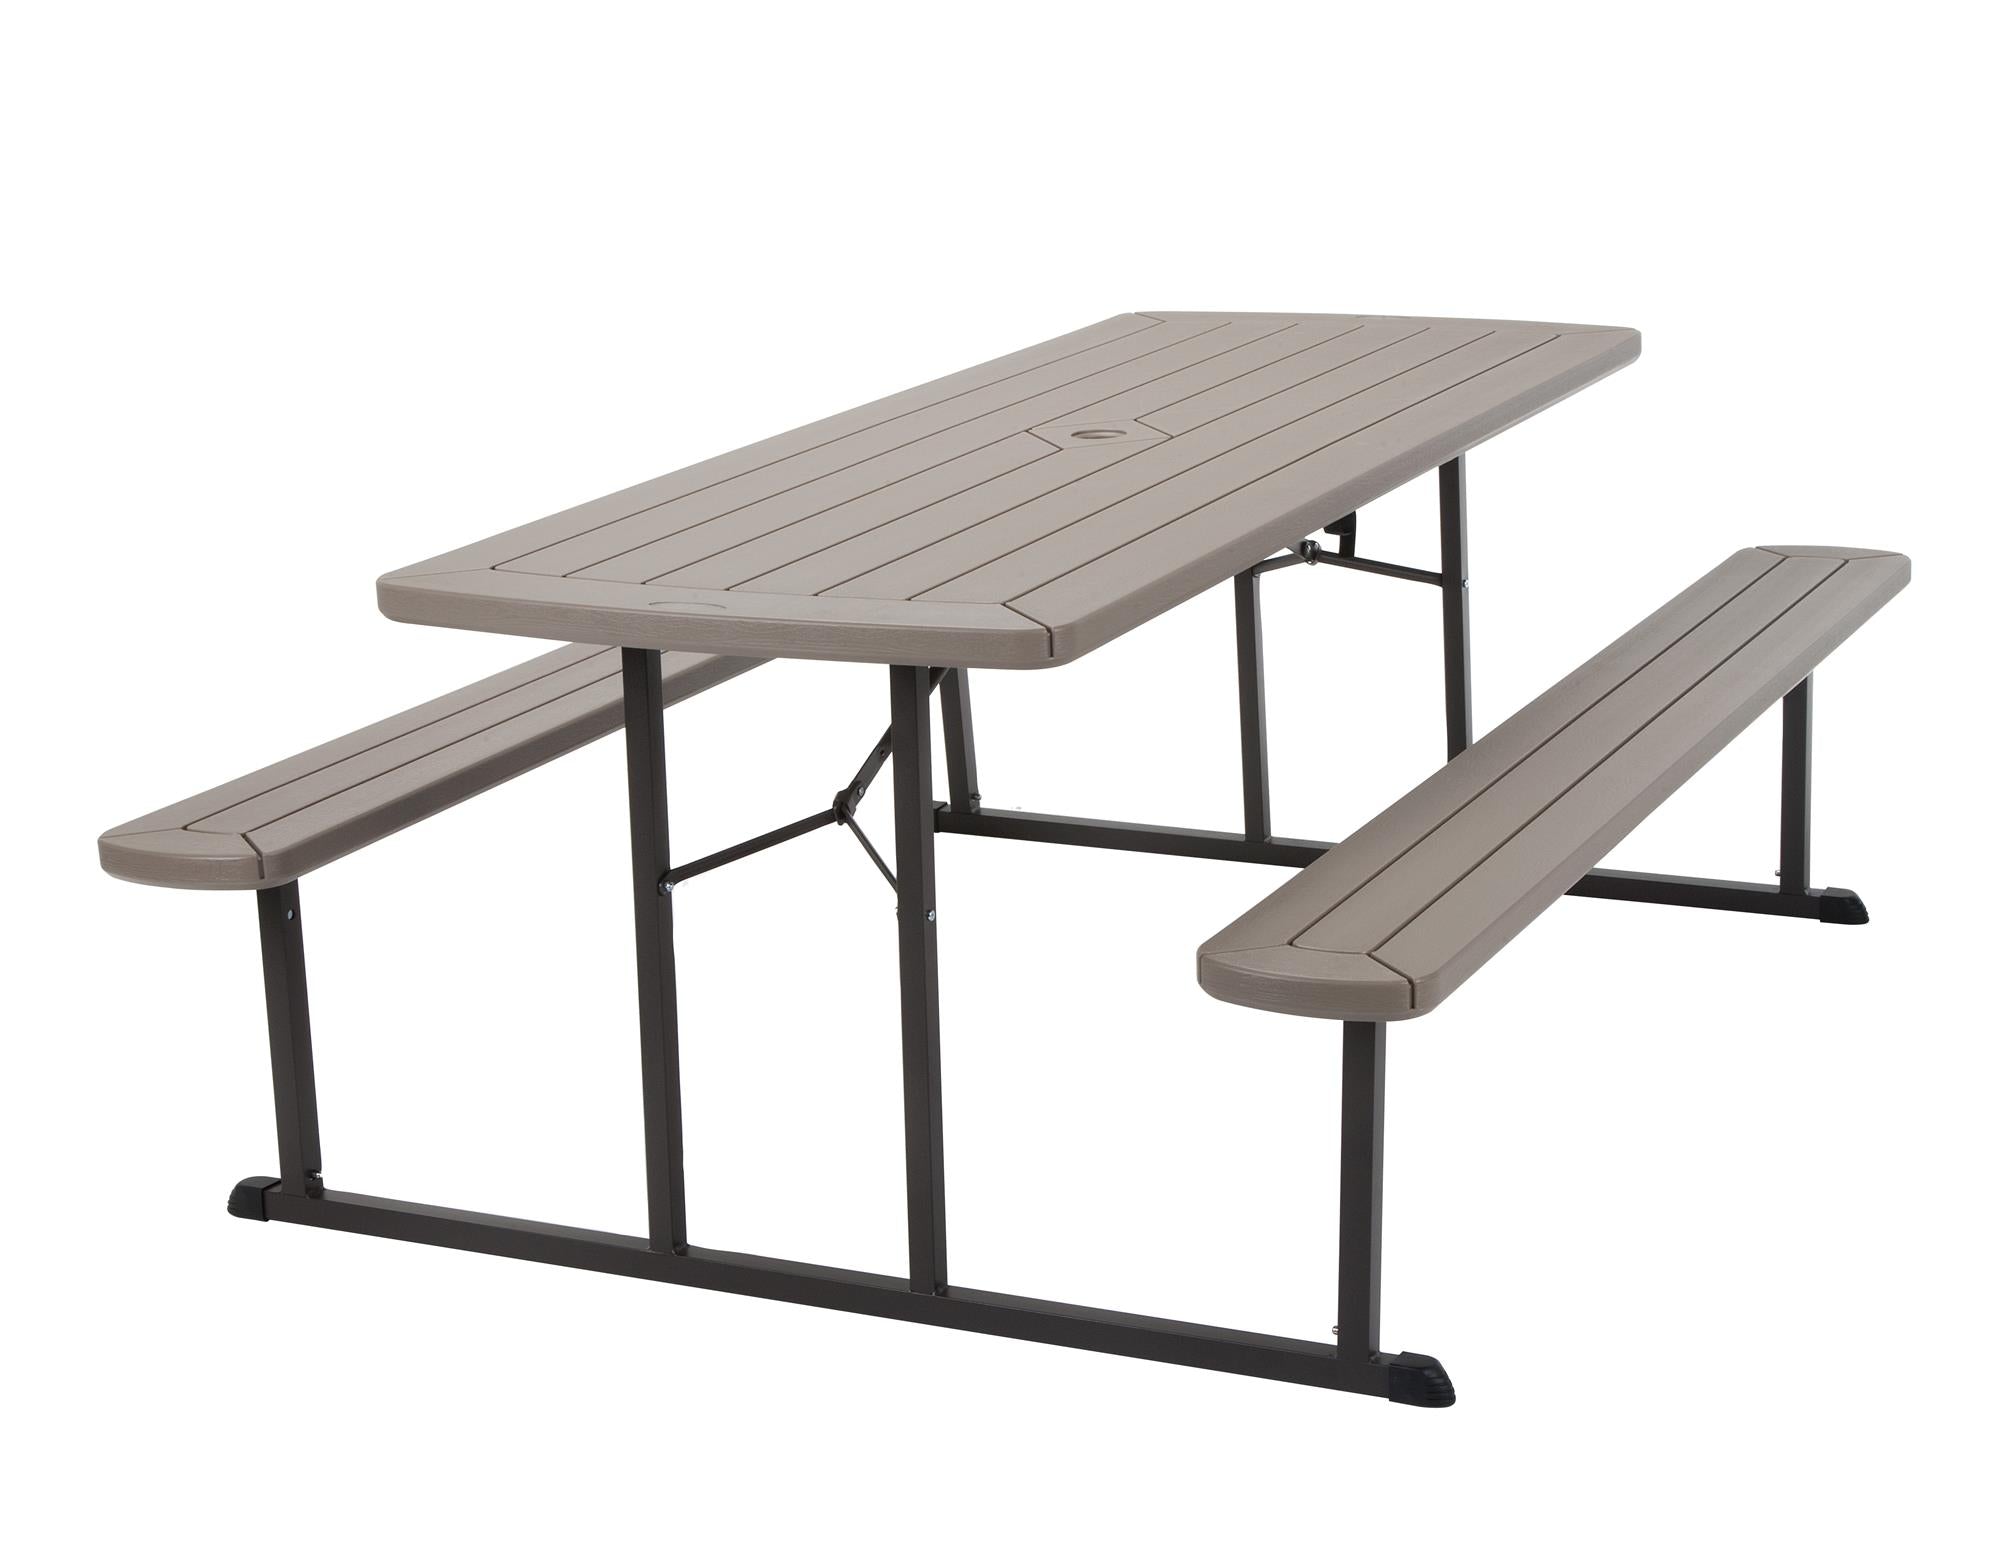 6 ft. Folding Picnic Table - Taupe